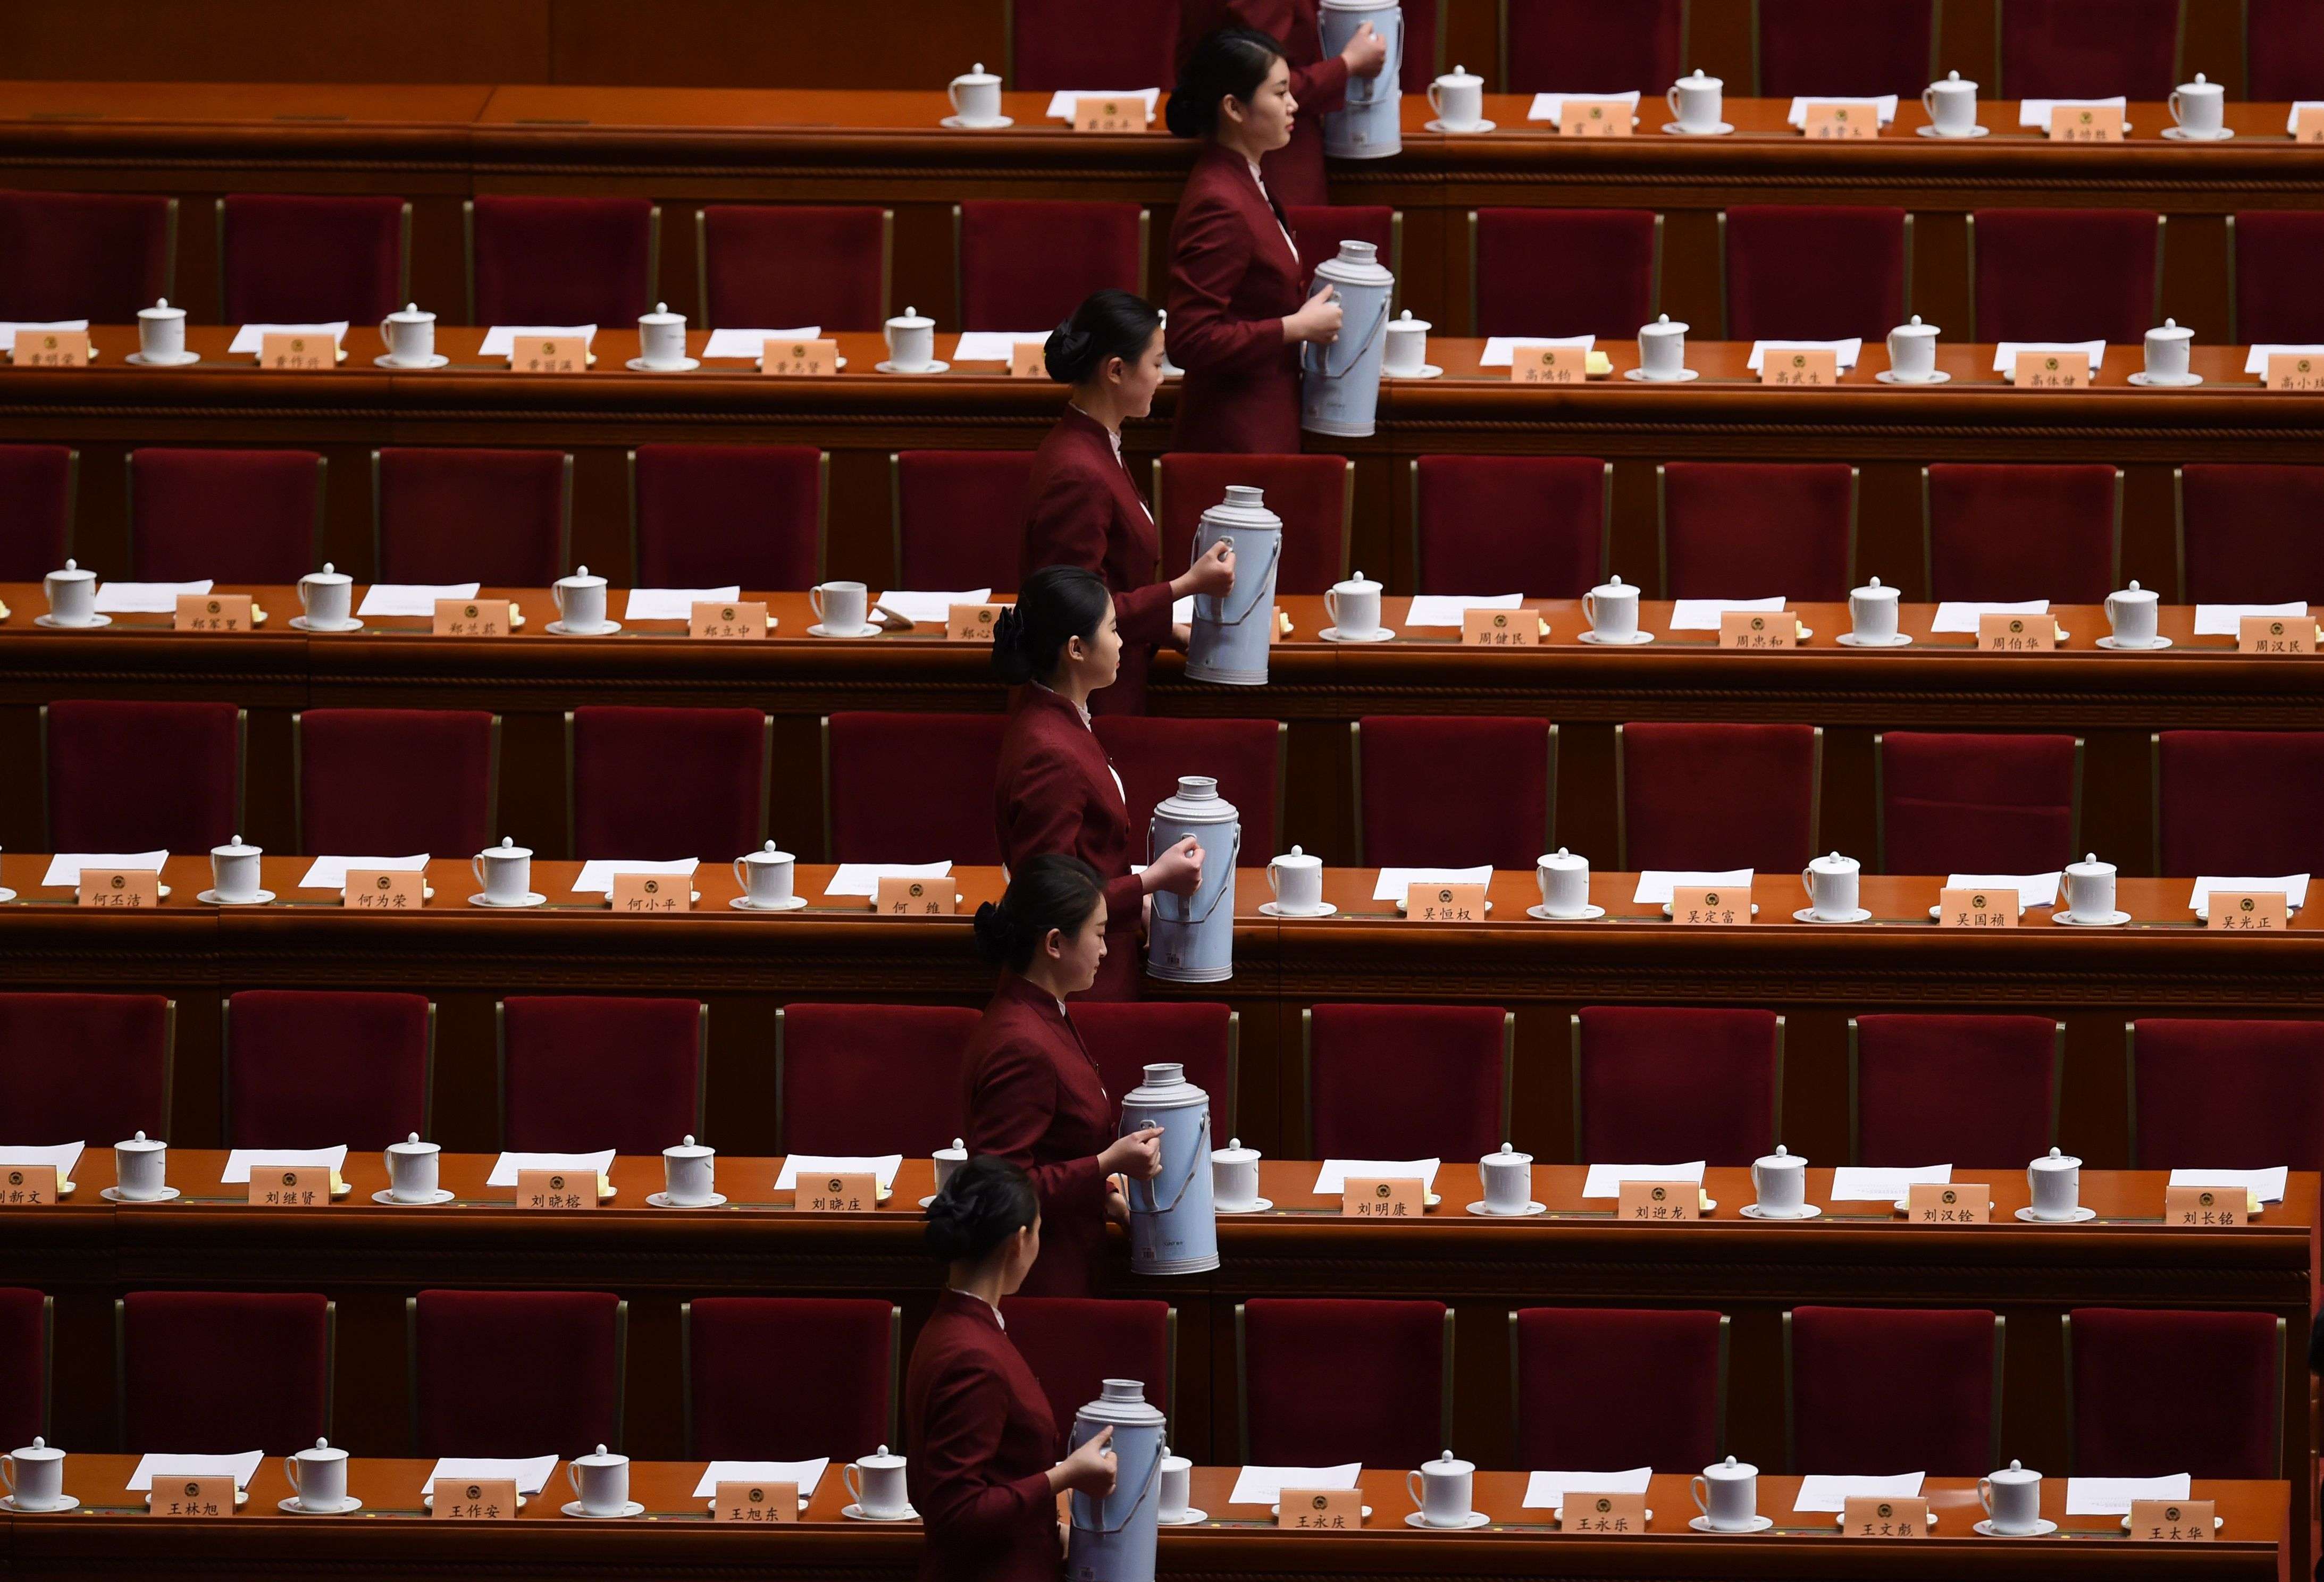 Attendants prepare tea for China’s leaders before the Chinese People's Political Consultative Conference closes at Beijing’s Great Hall of the People. Photo: AFP